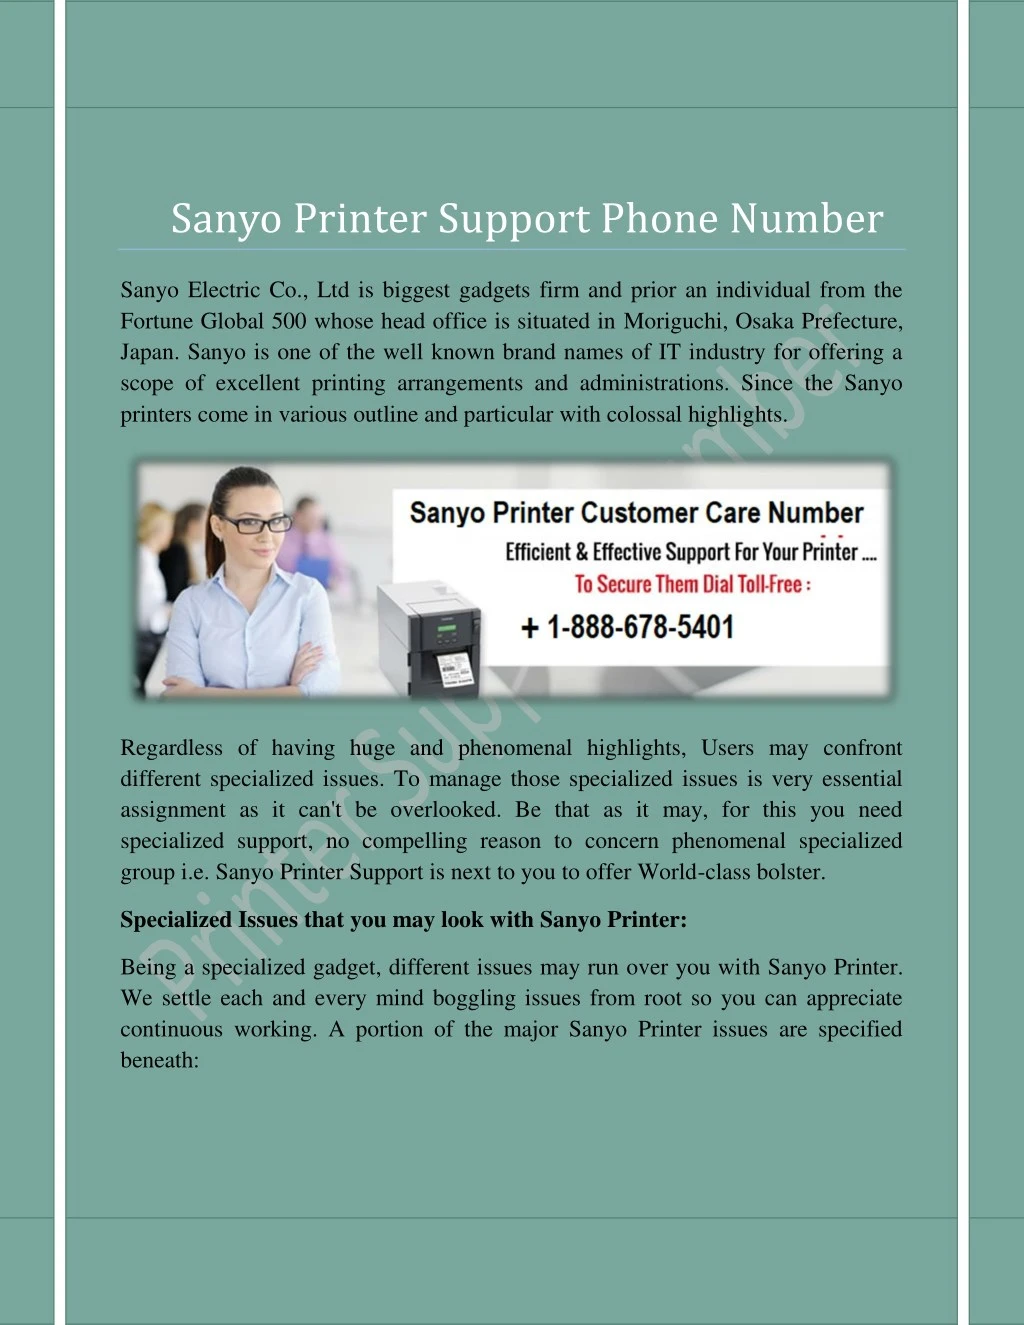 sanyo printer support phone number